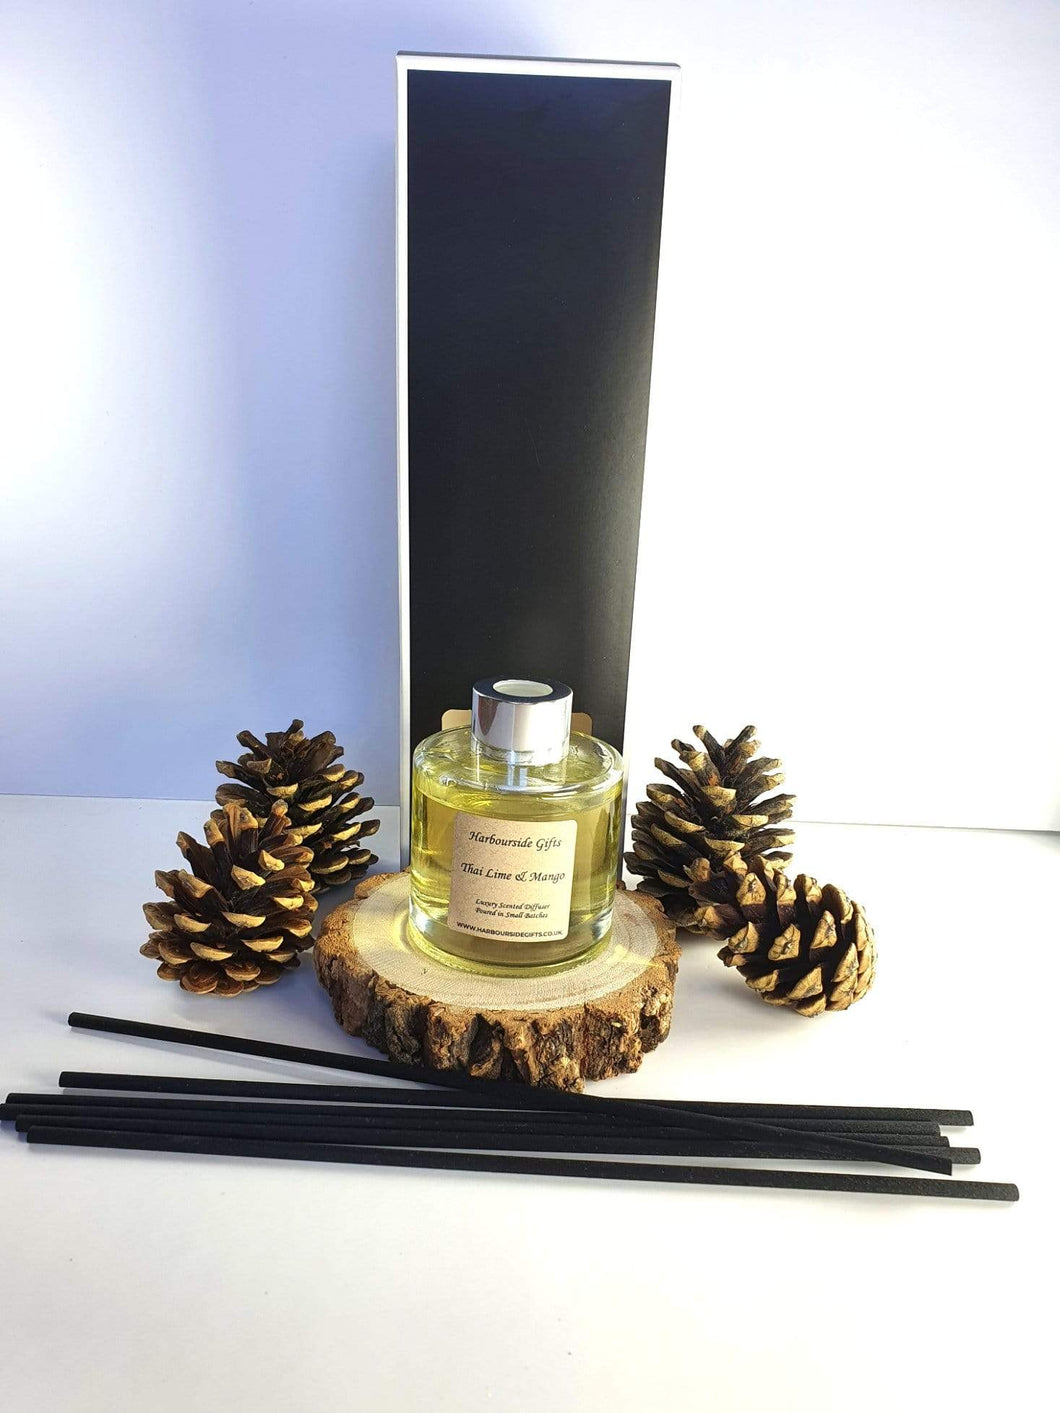 Thai Lime & Mango Reed Diffuser 100ml with 6 High Quality Reeds in a Gift Box Harbourside Gifts